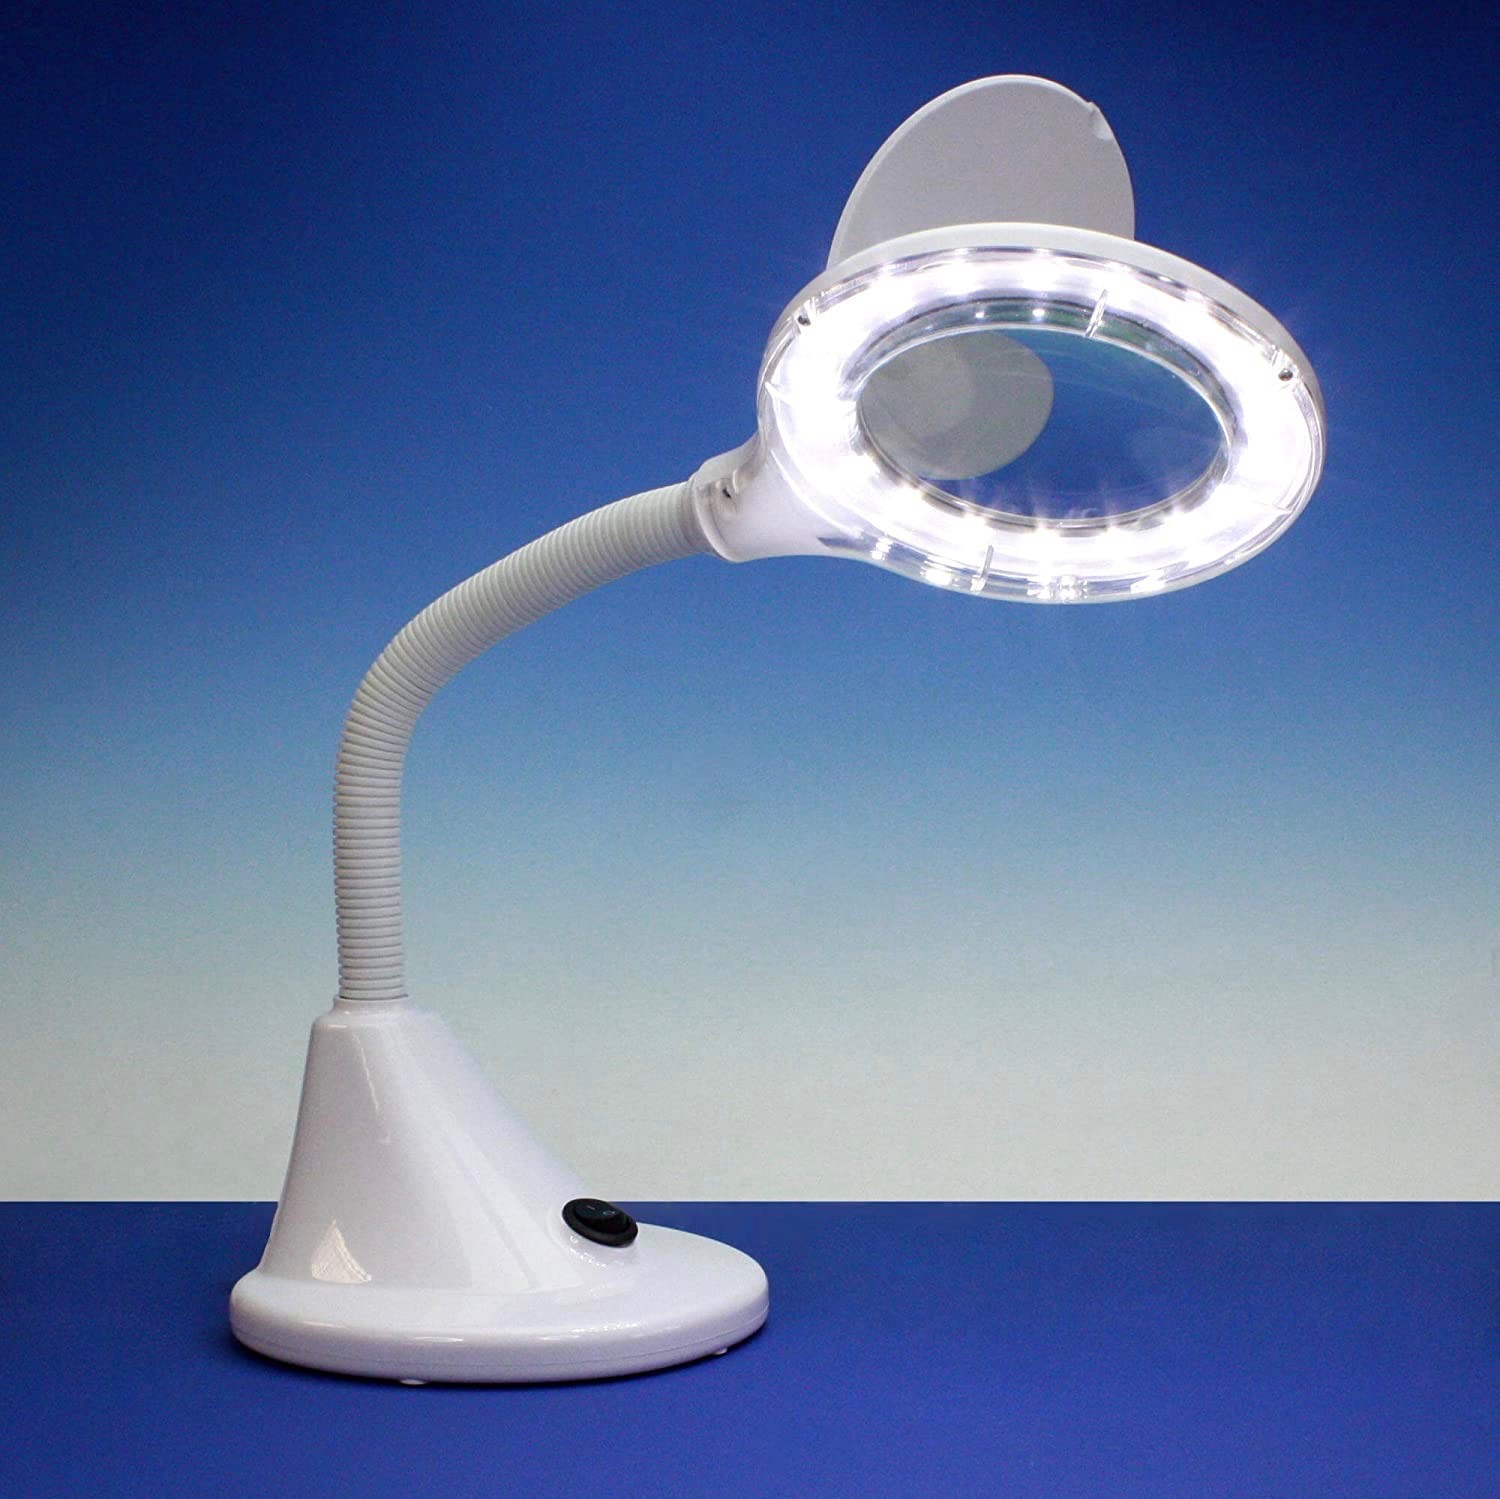 118,95 € Free Shipping | Technical lamp 5W 28×20 cm. LED Illuminated Magnifying Glass Glass. White Color